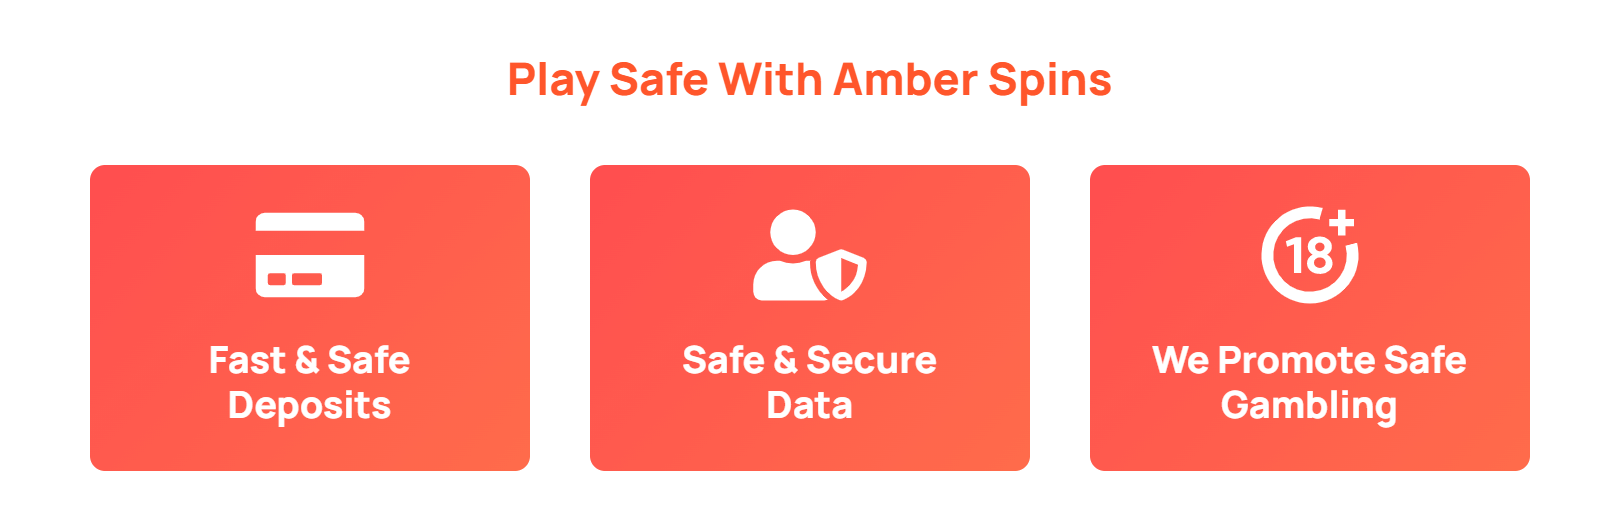 amber spins safety and security